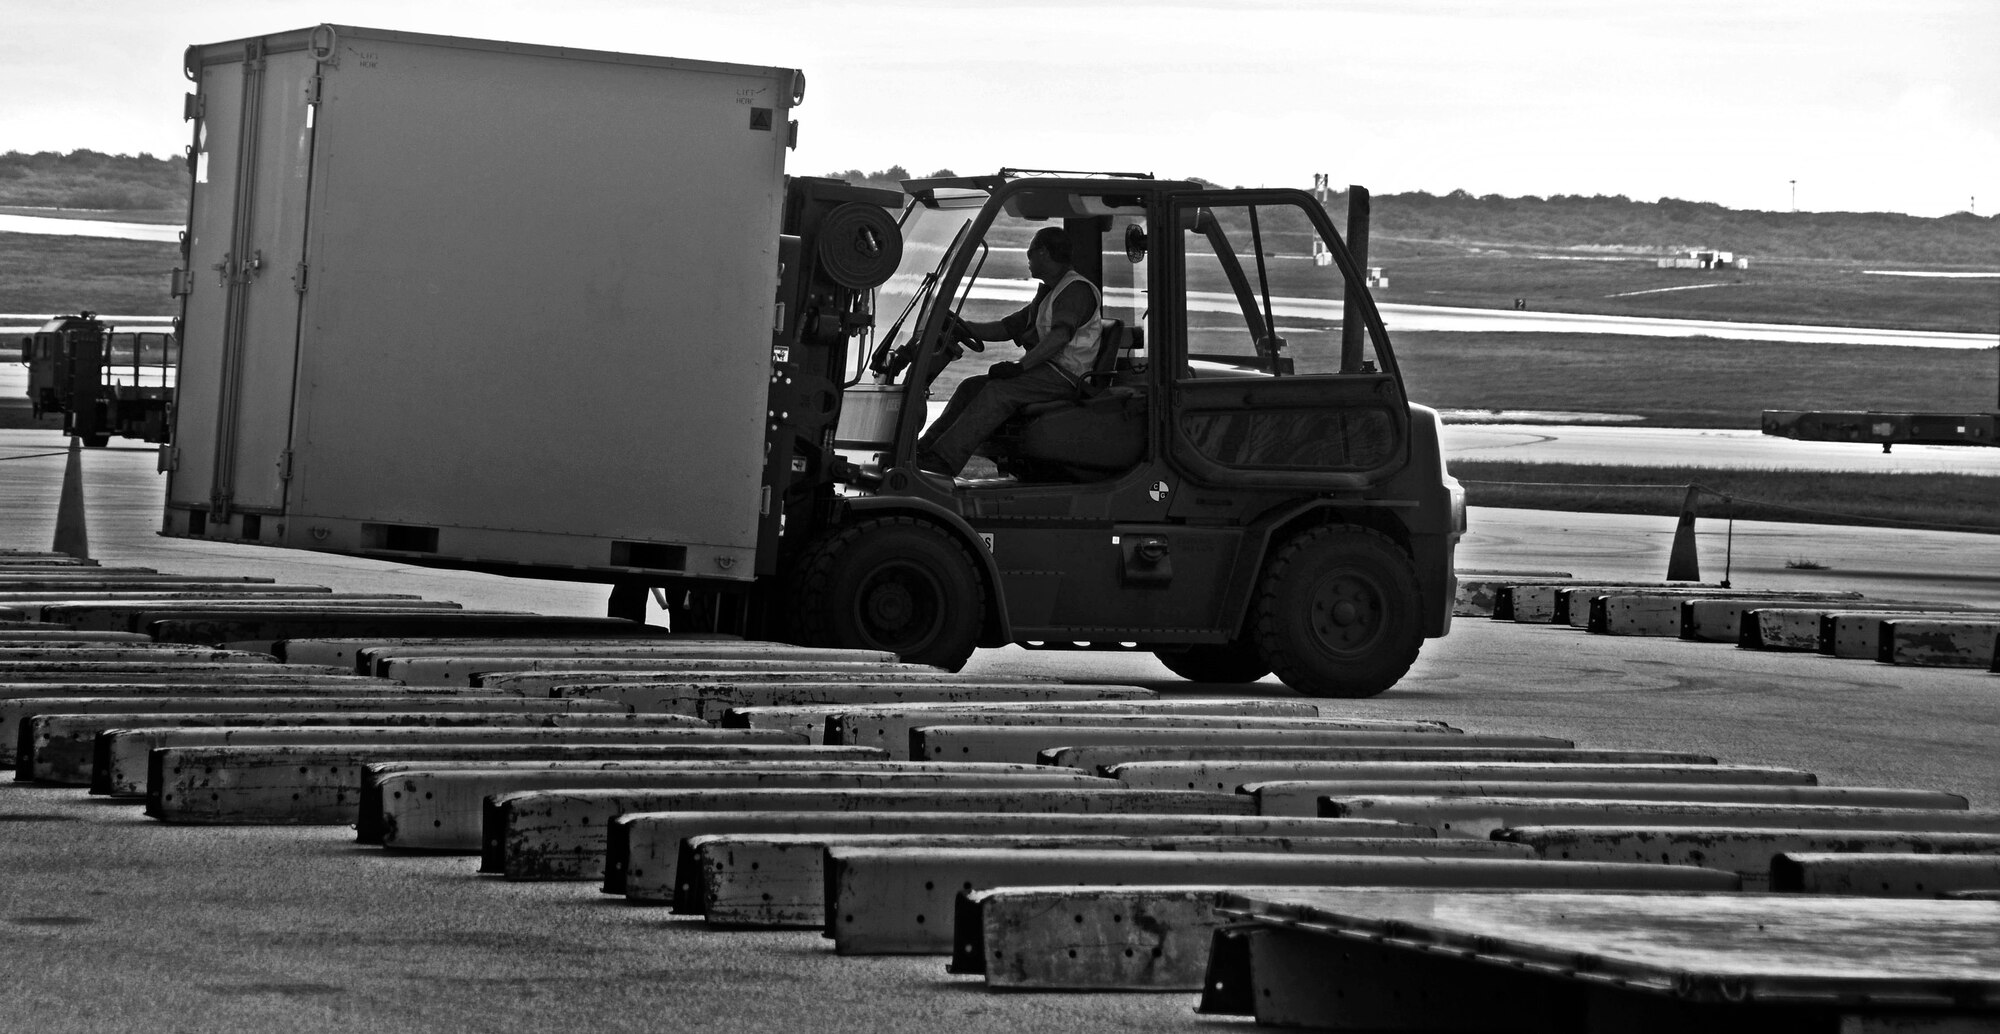 A member of DZSP-21 moves cargo during Exercise Beverly Palm 13-05 on Andersen Air Force Base, Guam, Sept. 9, 2013. During the exercise, Andersen Airmen practiced their ability to react, defend and execute operations in a wartime scenario. (U.S. Air Force photo illustration by Senior Airman Marianique Santos /Released)